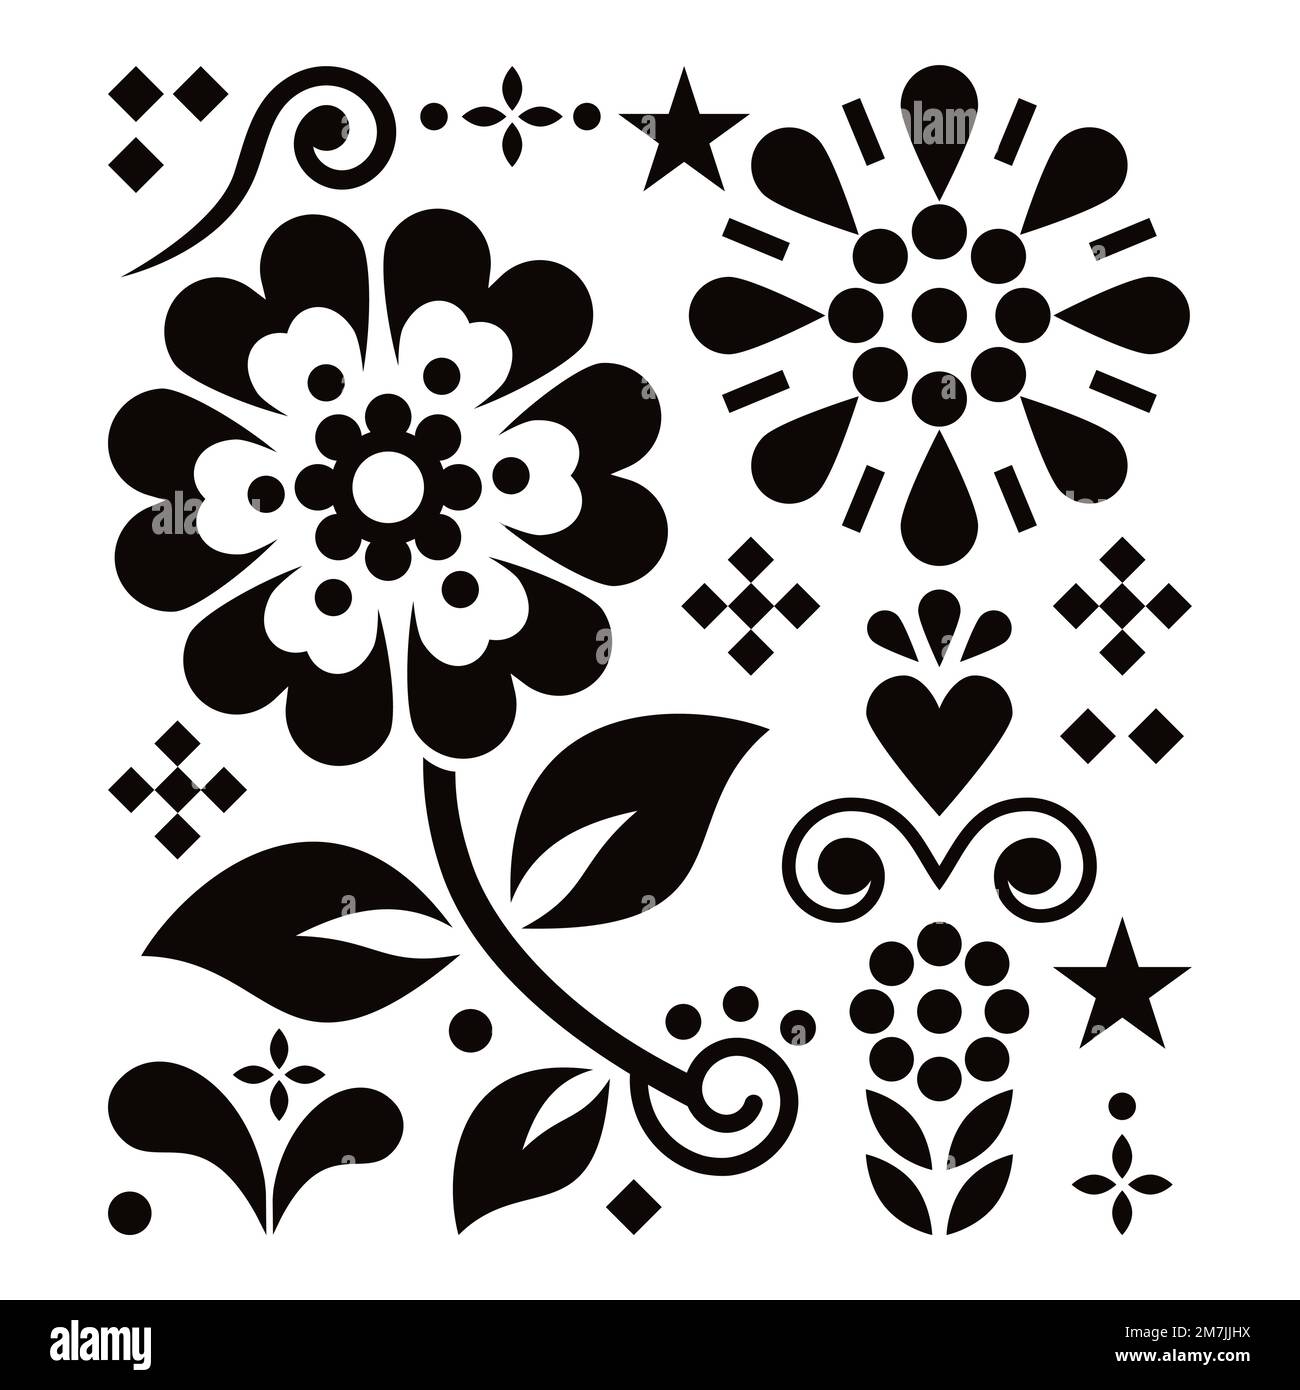 Mexican traditional folk art vector geometric pattern with flowers and leaves, inspired by designs from Mexico in black and white Stock Vector